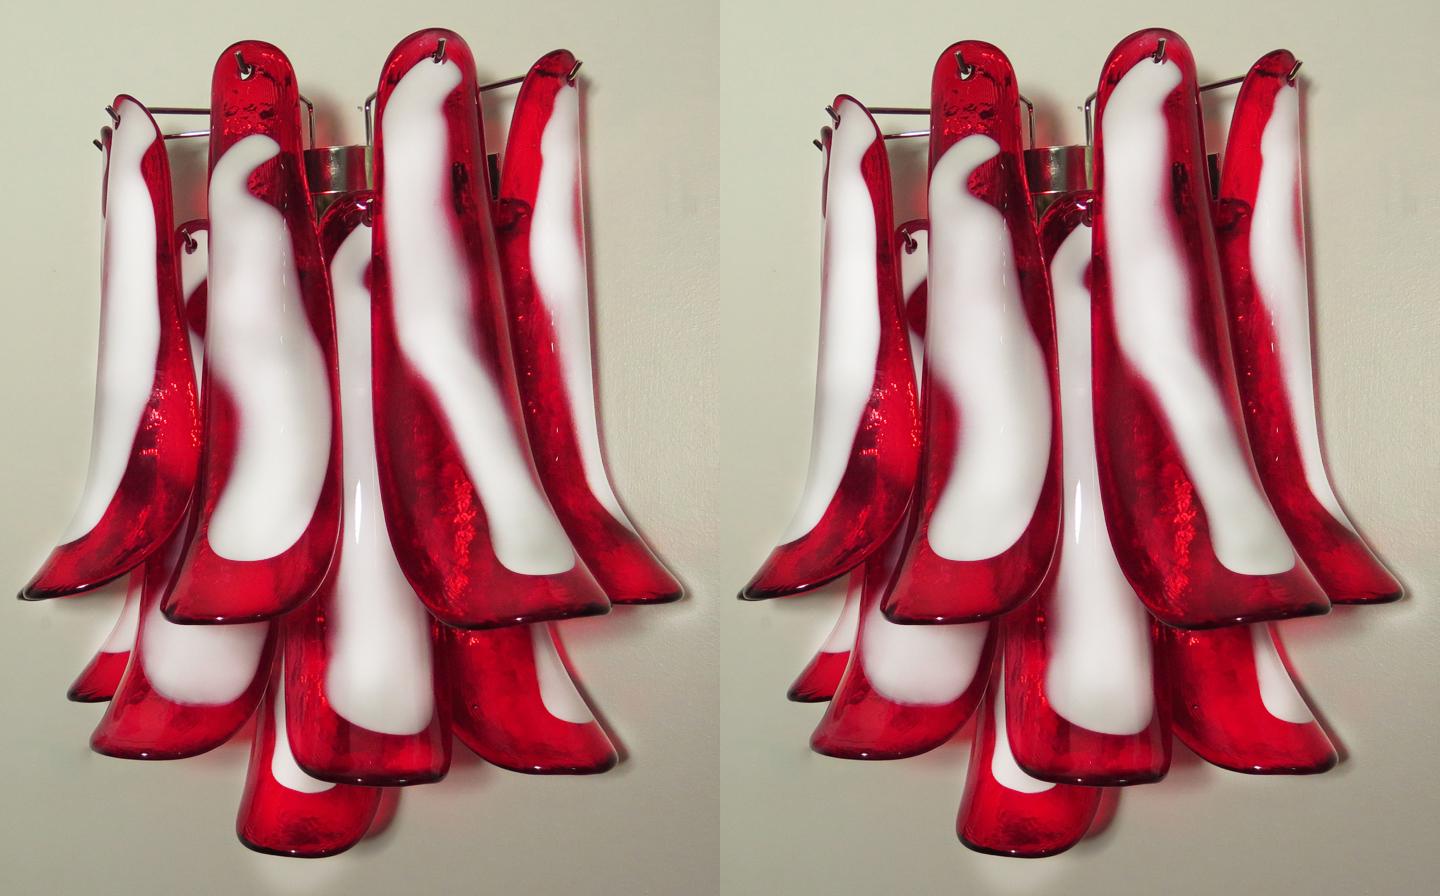 Pair of vintage Italian Murano appliques in the manner of Mazzega. Wall lights have 10 red and white “lattimo” glasses (for each applique) in a nickel-plated metal frame.
Period: 1980s
Dimensions: 16.50 inches (42 cm) height; 13.80 inches (35 cm)